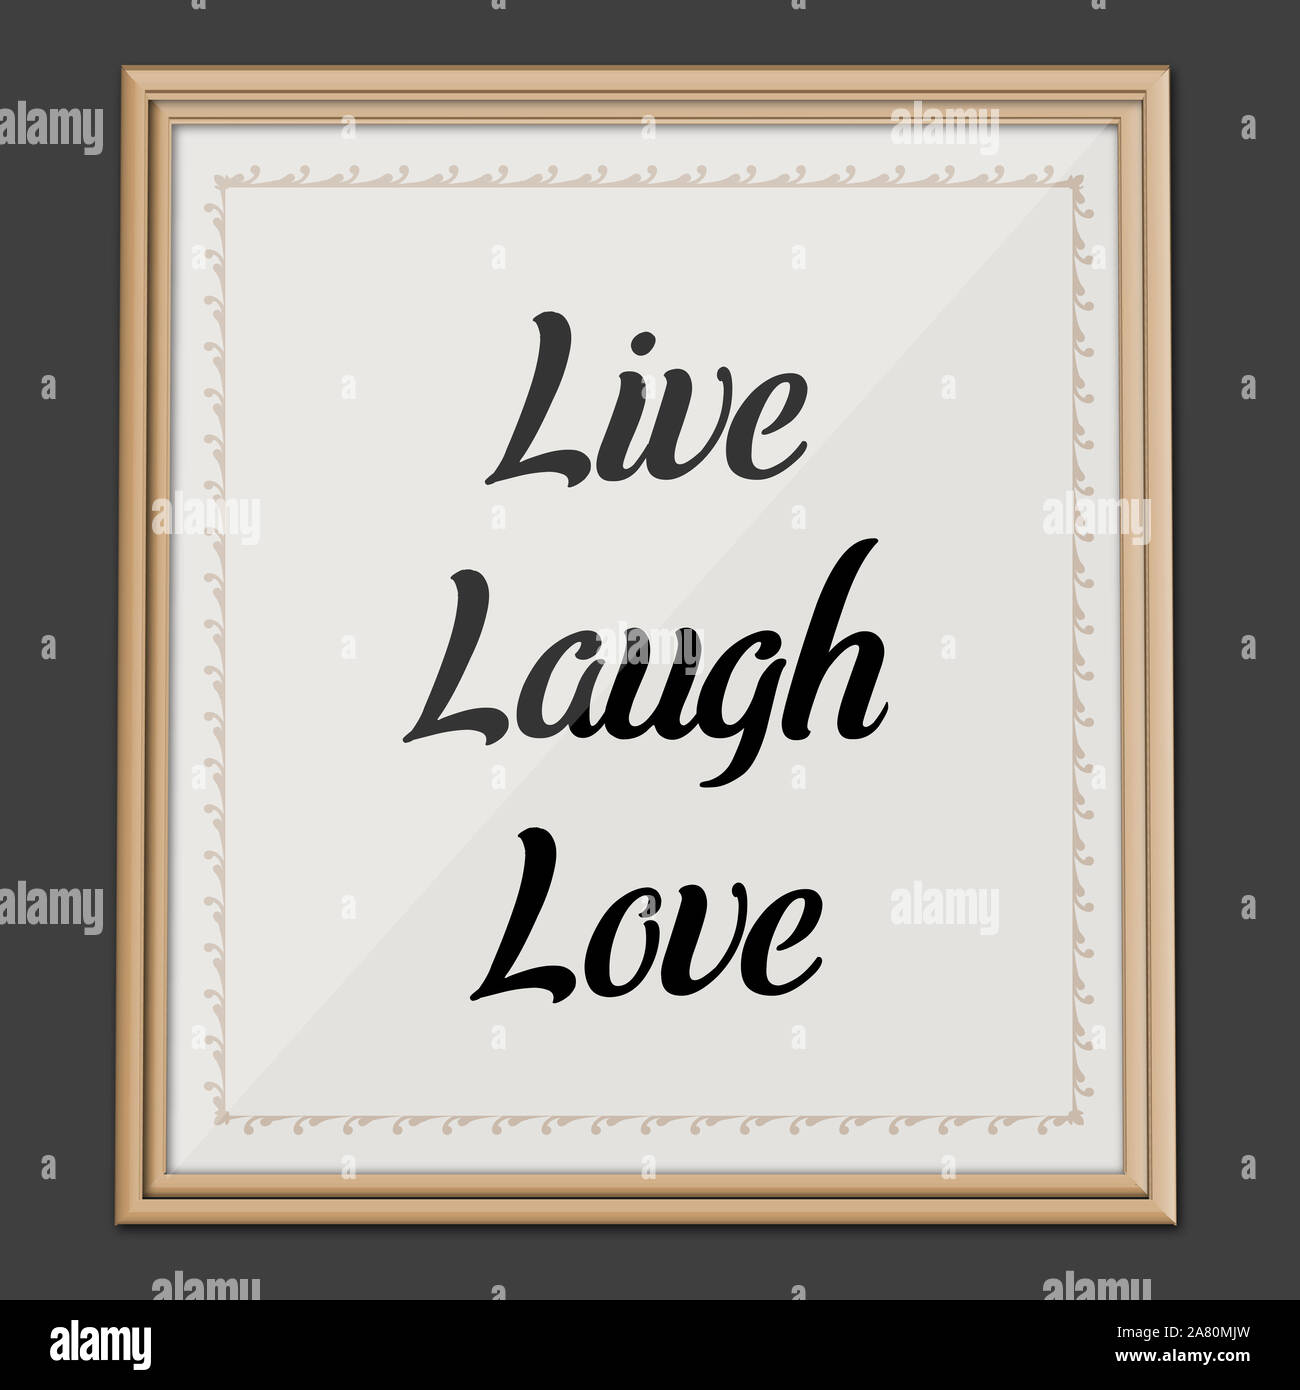 Live Laugh Love. Motivation and Inspirational Quote Wall art Poster Stock Photo